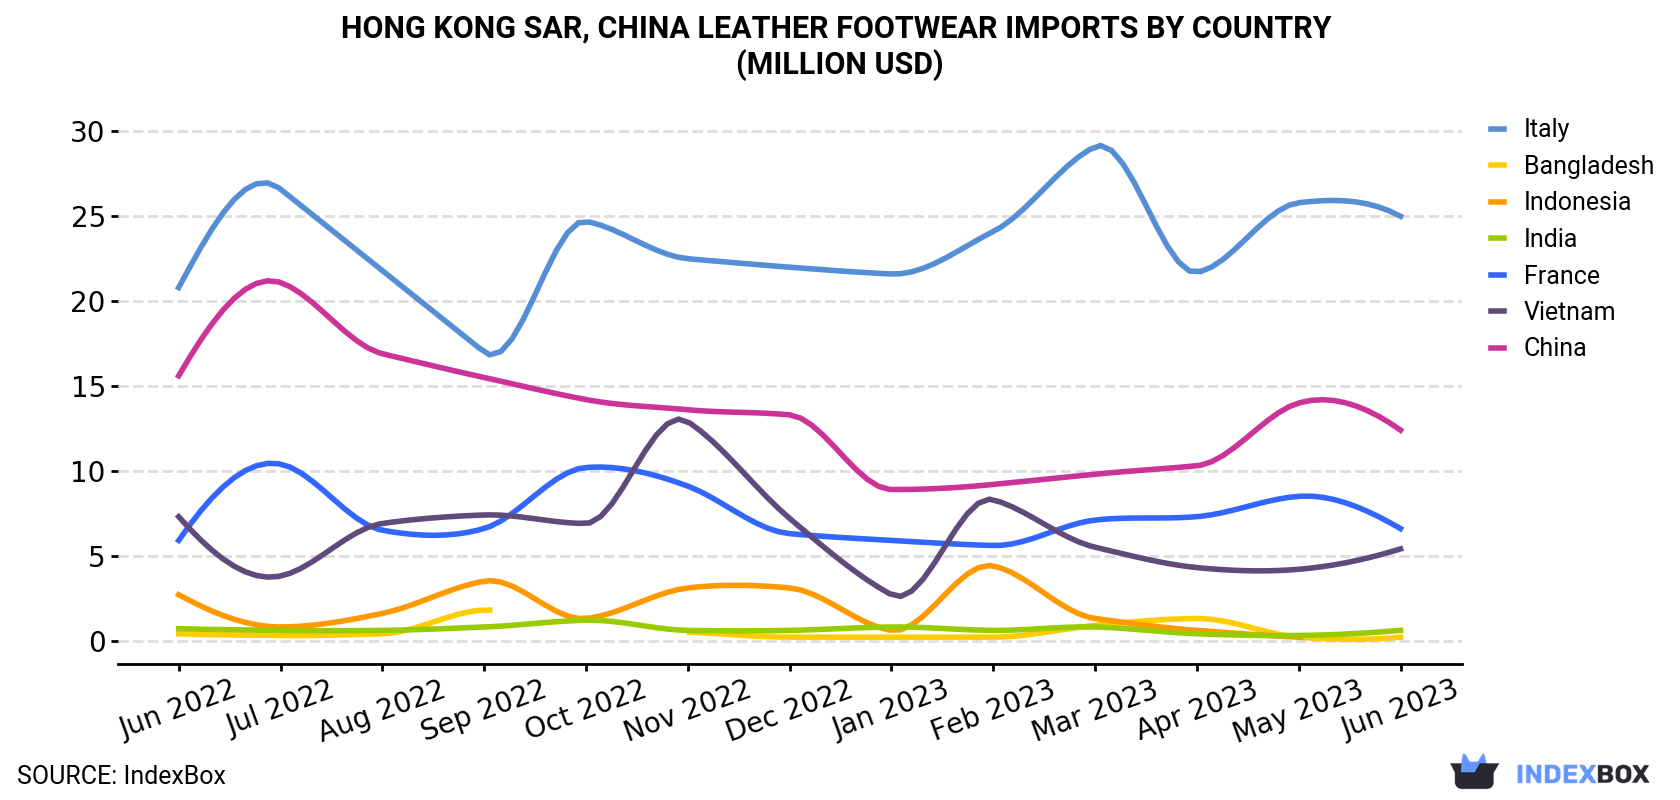 Hong Kong Leather Footwear Imports By Country (Million USD)